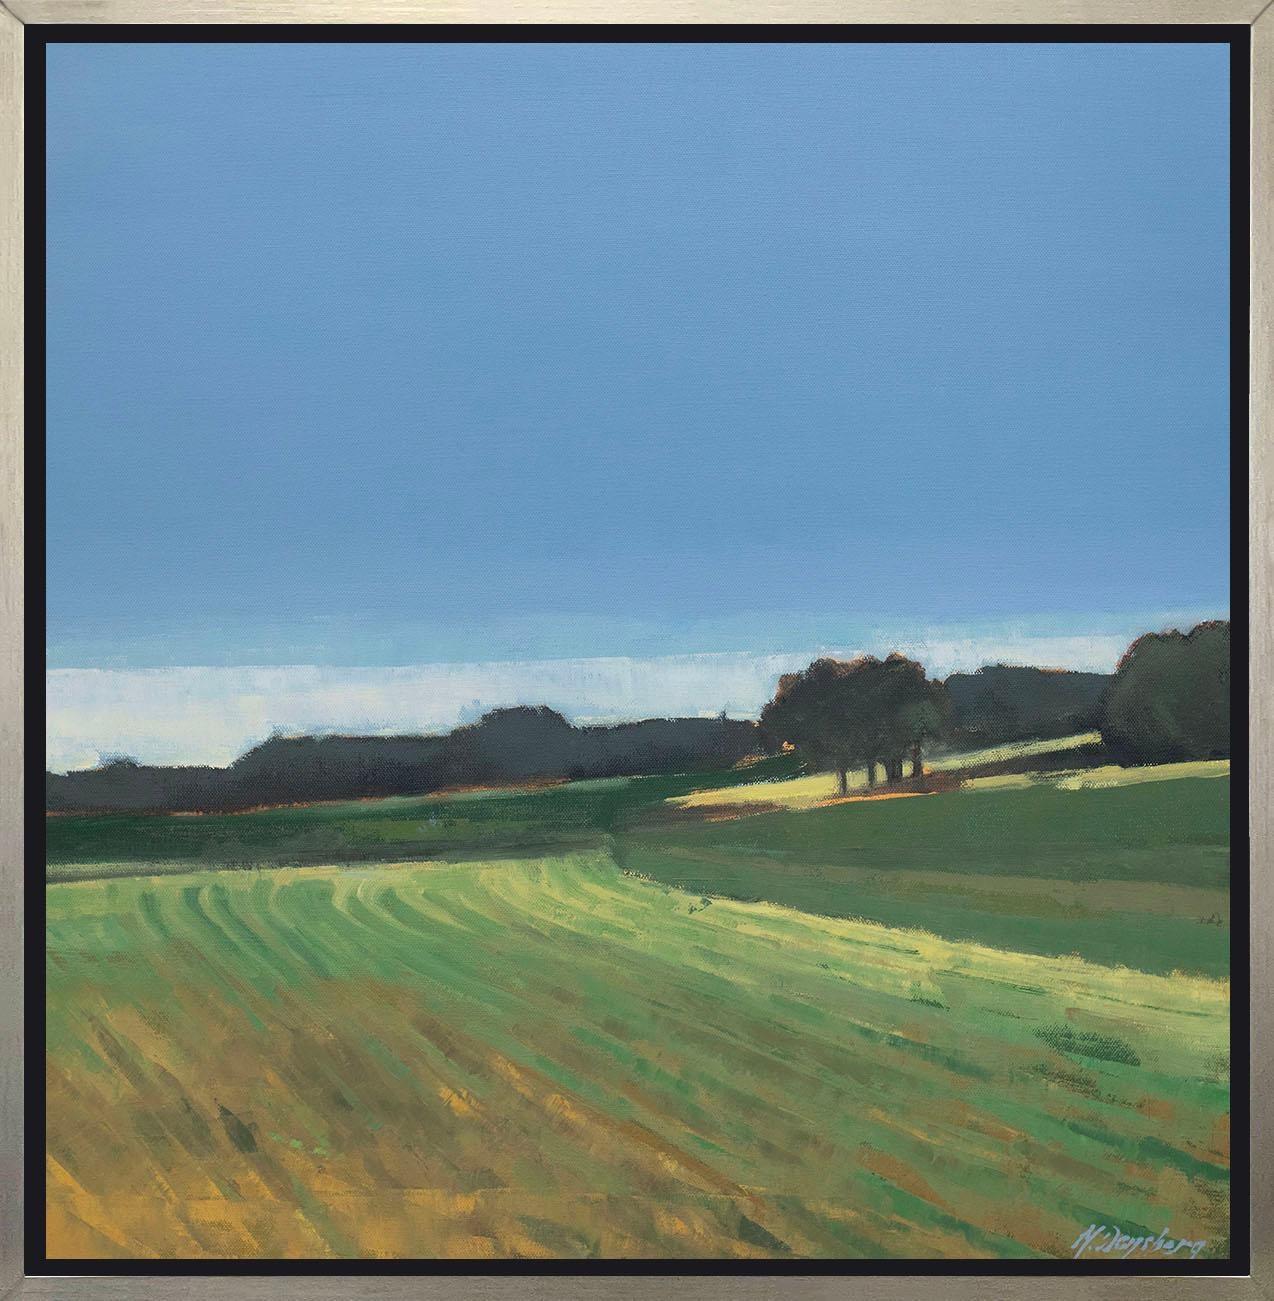 This Limited Edition giclee landscape print by Molly Doe Wensberg is an edition size of 195. It features a cool blue and green palette with warm yellow accents. The artist captures a scene of a field with lush foliage along the horizon beneath a